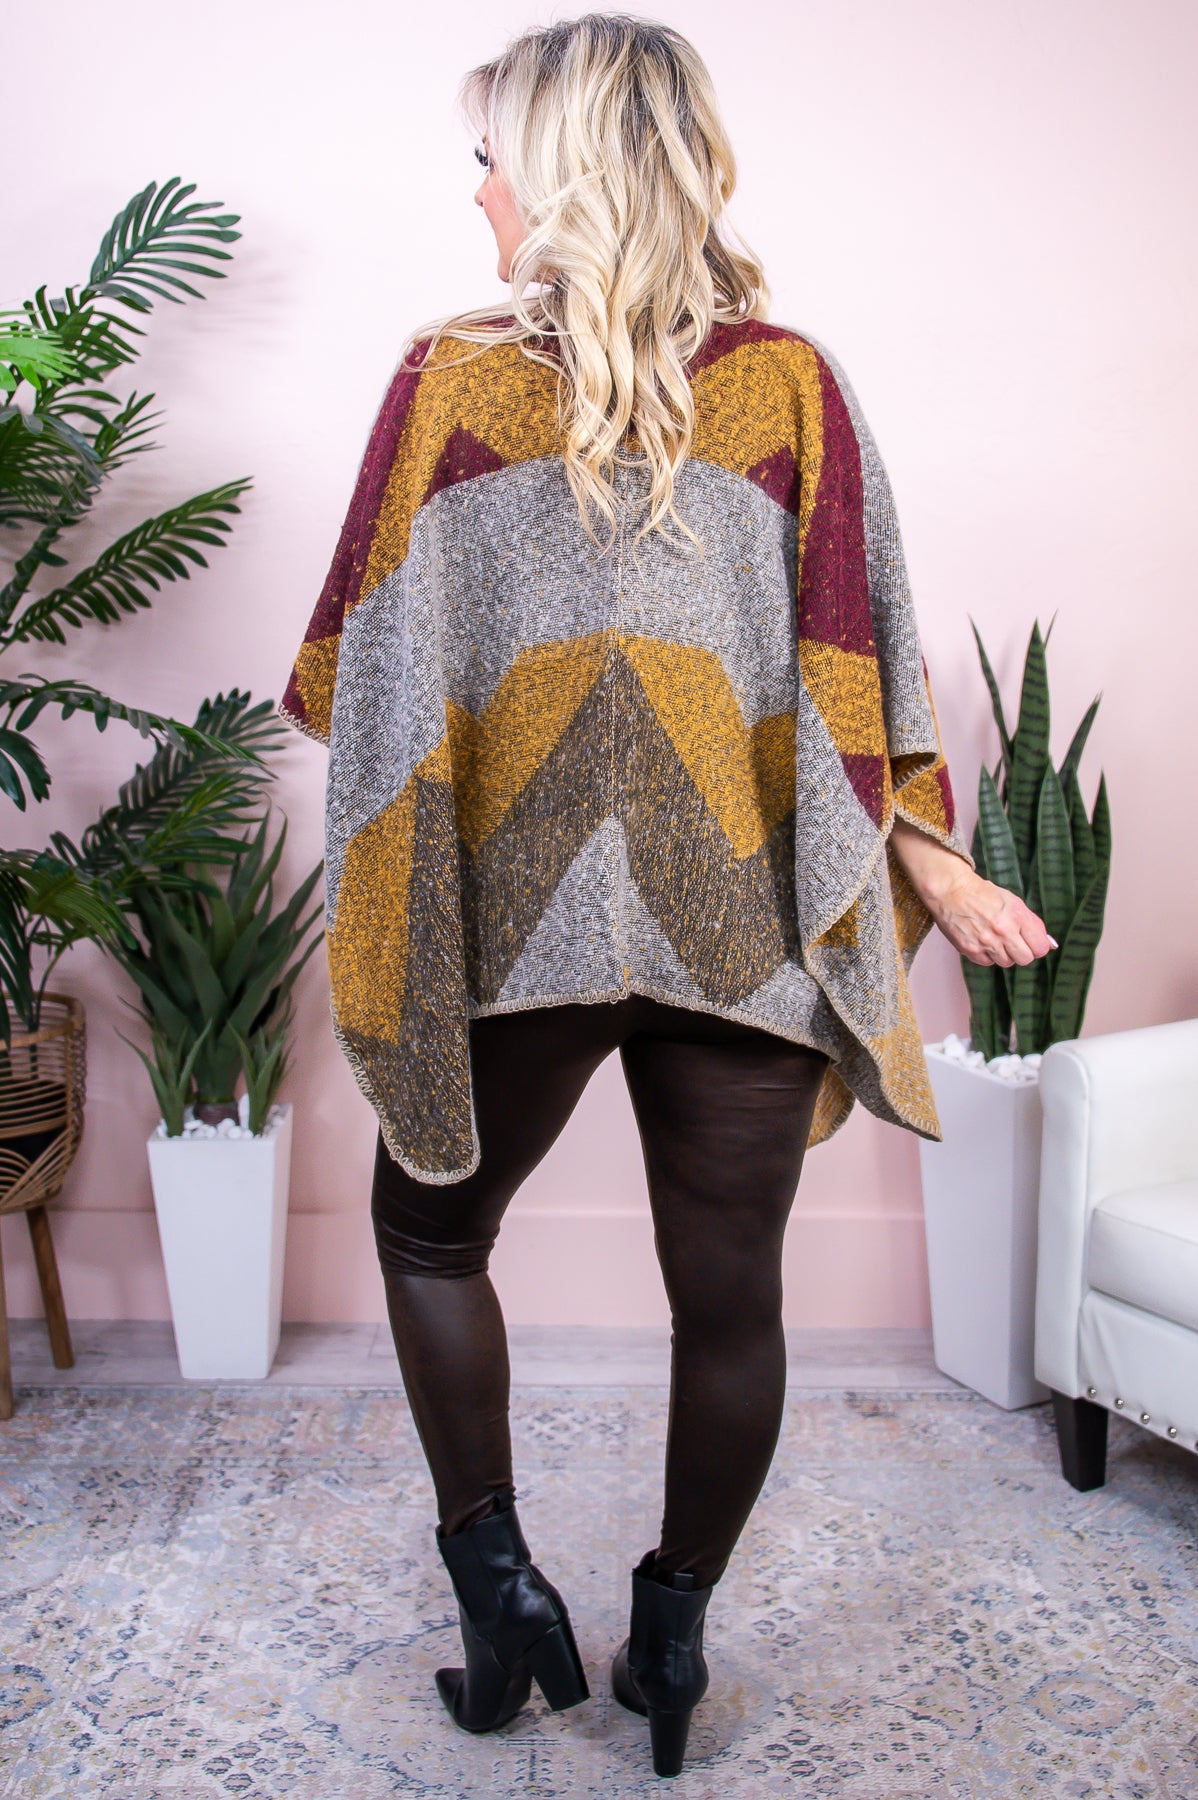 Completely Cozy Wine/Multi Color Chevron Asymmetrical Cardigan (One Size 4-20) - O5303WN